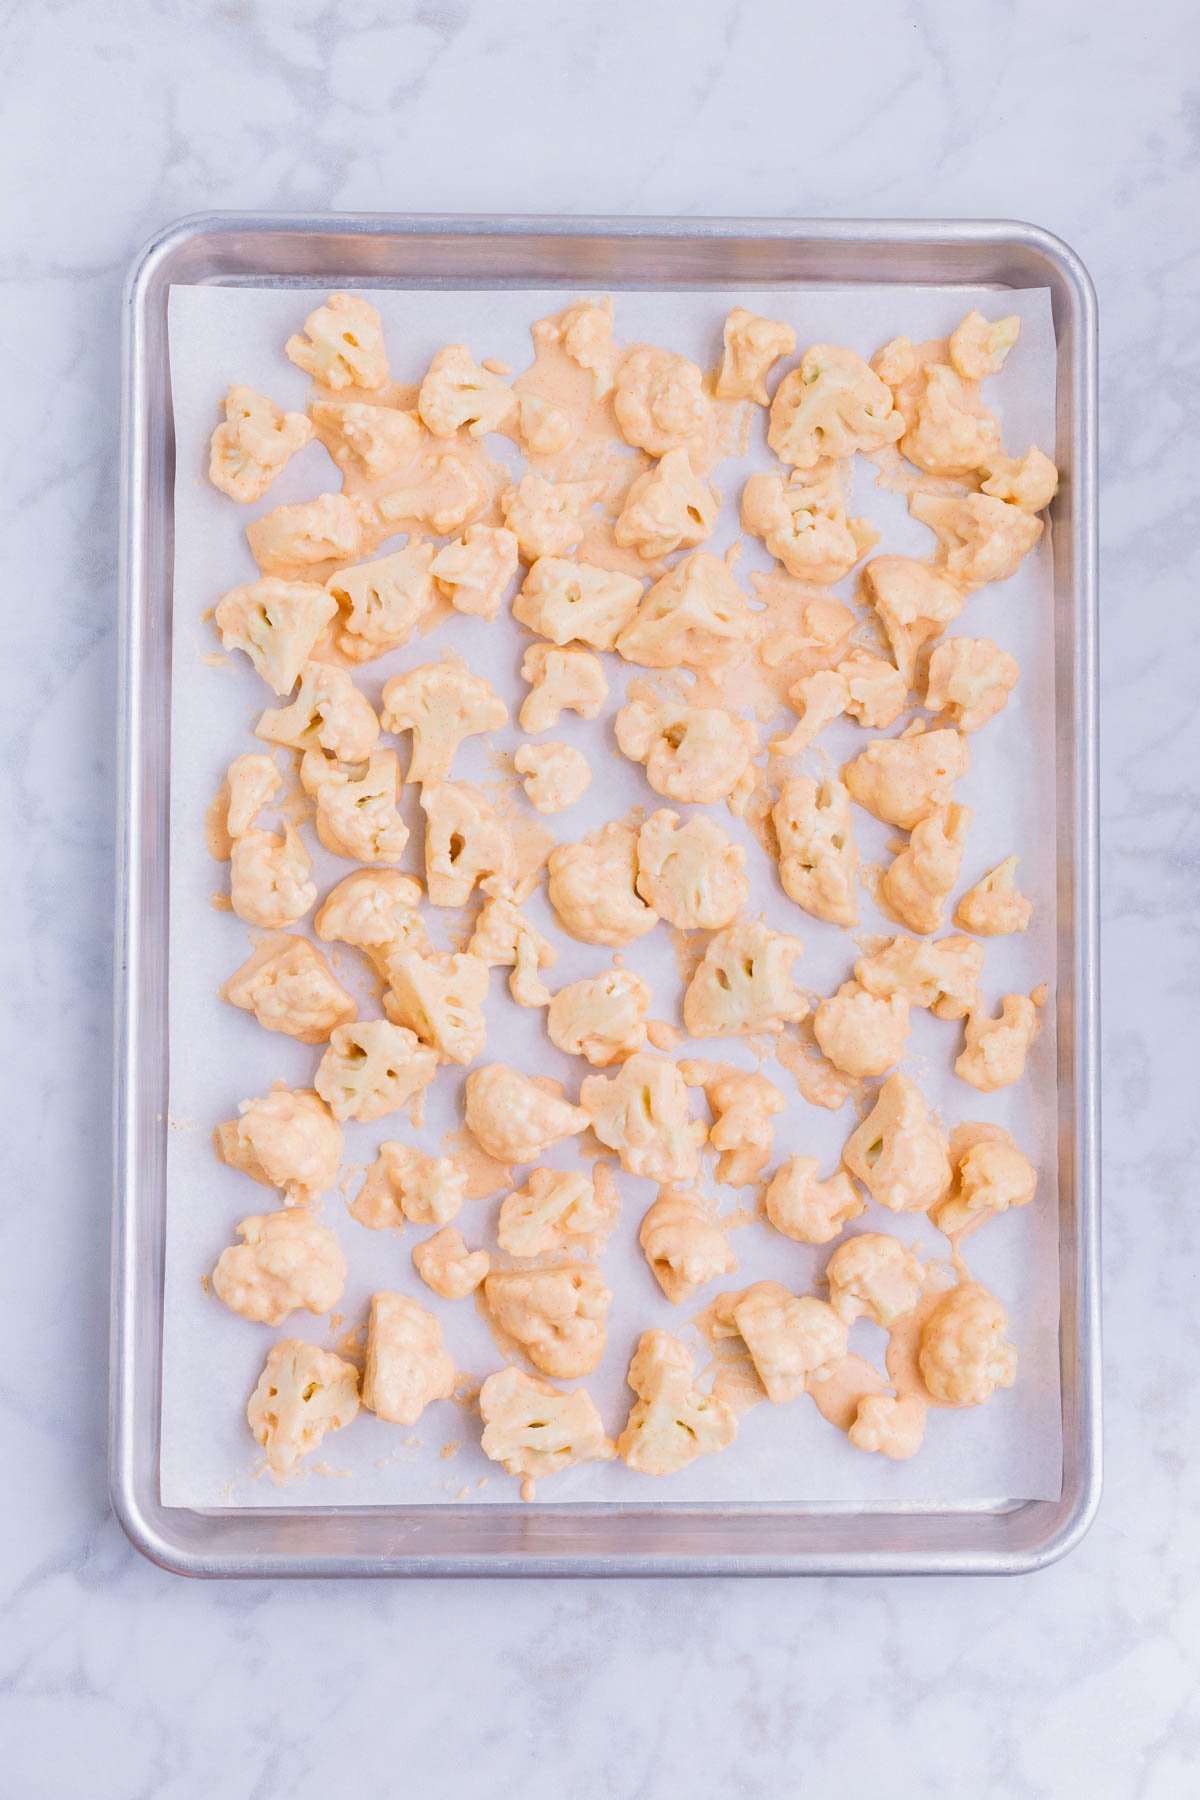 Coated cauliflower pieces are arranged on a baking sheet.